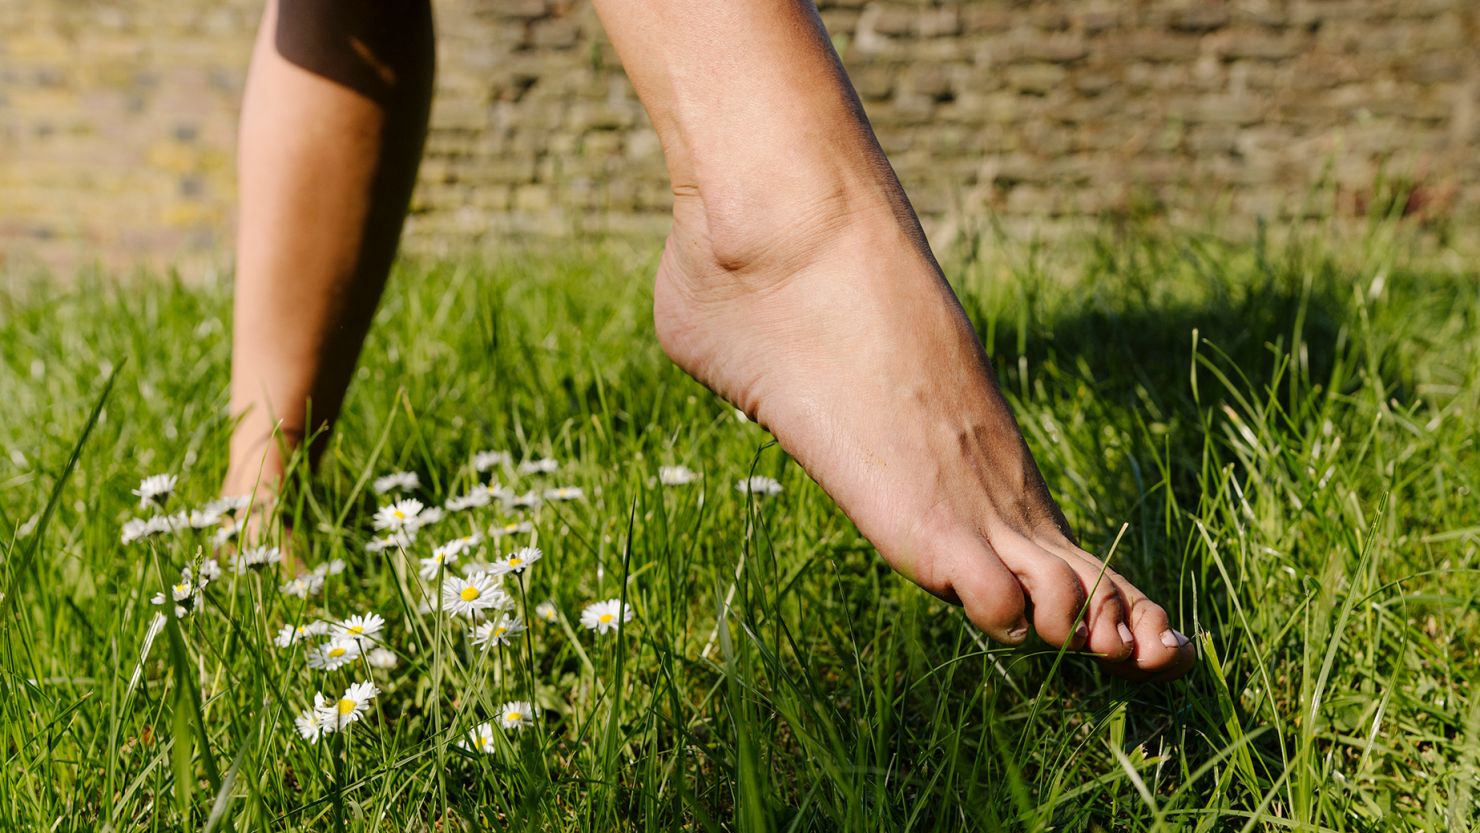 Foot health is an important indicator of well-being.